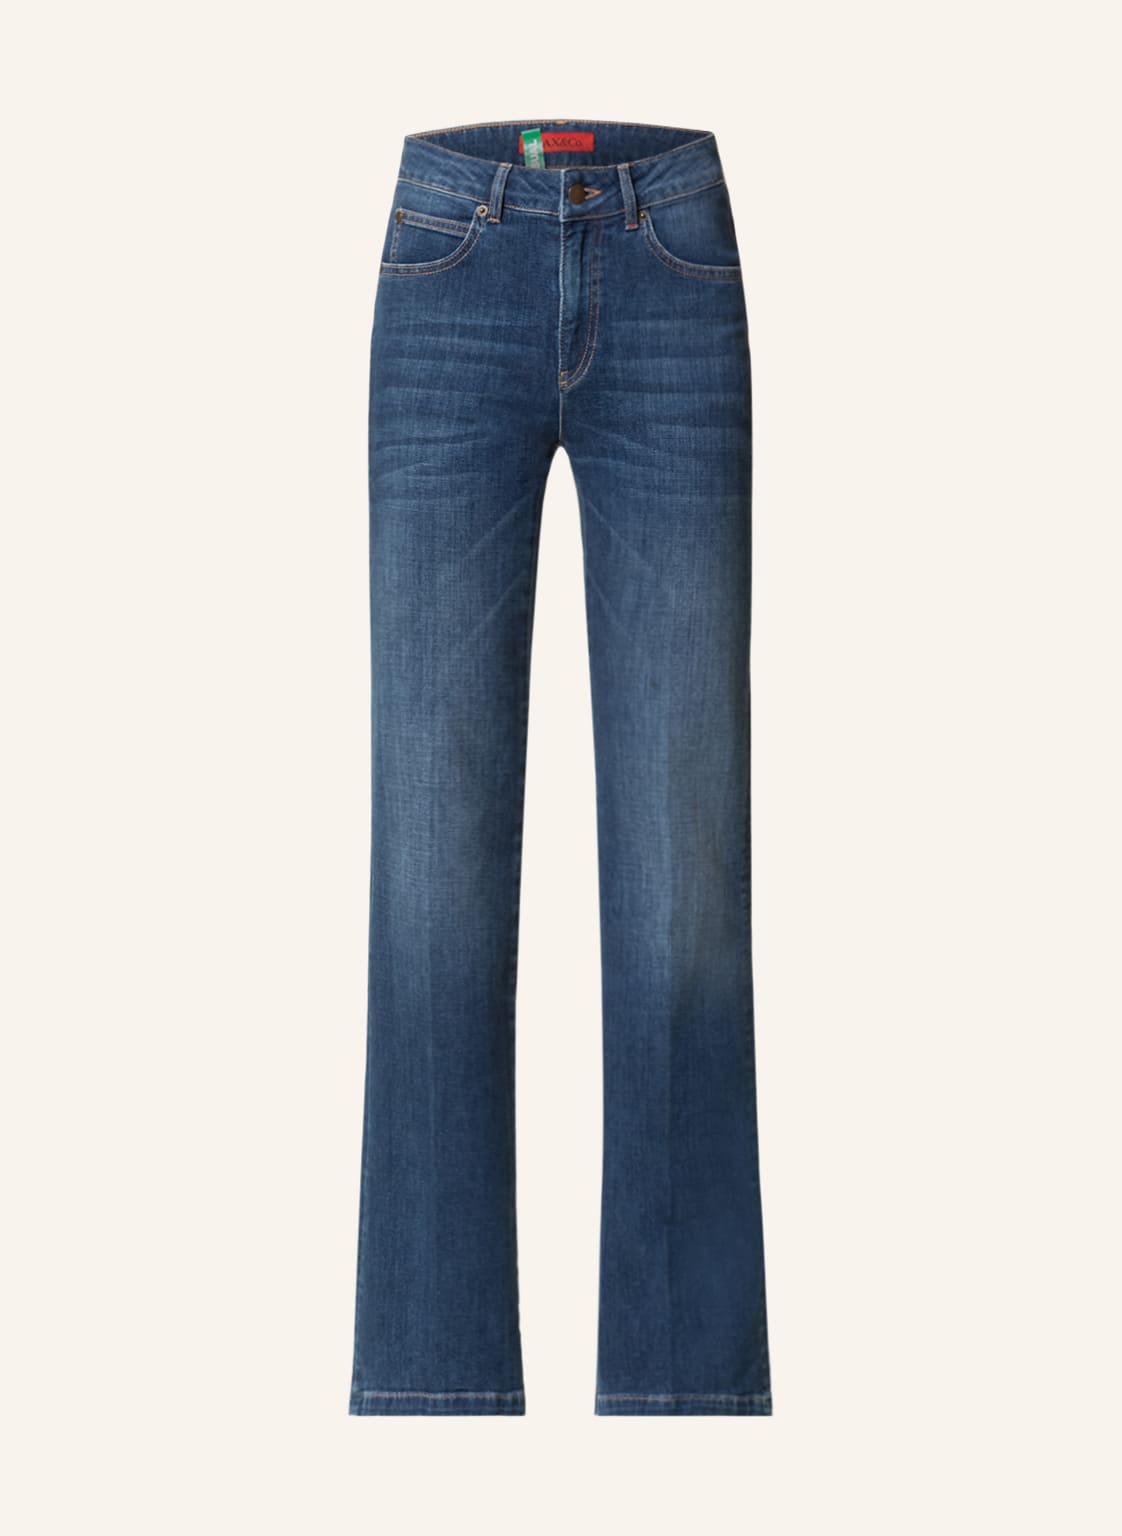 Max & Co. Flared Jeans Pasta weiss von MAX & Co.